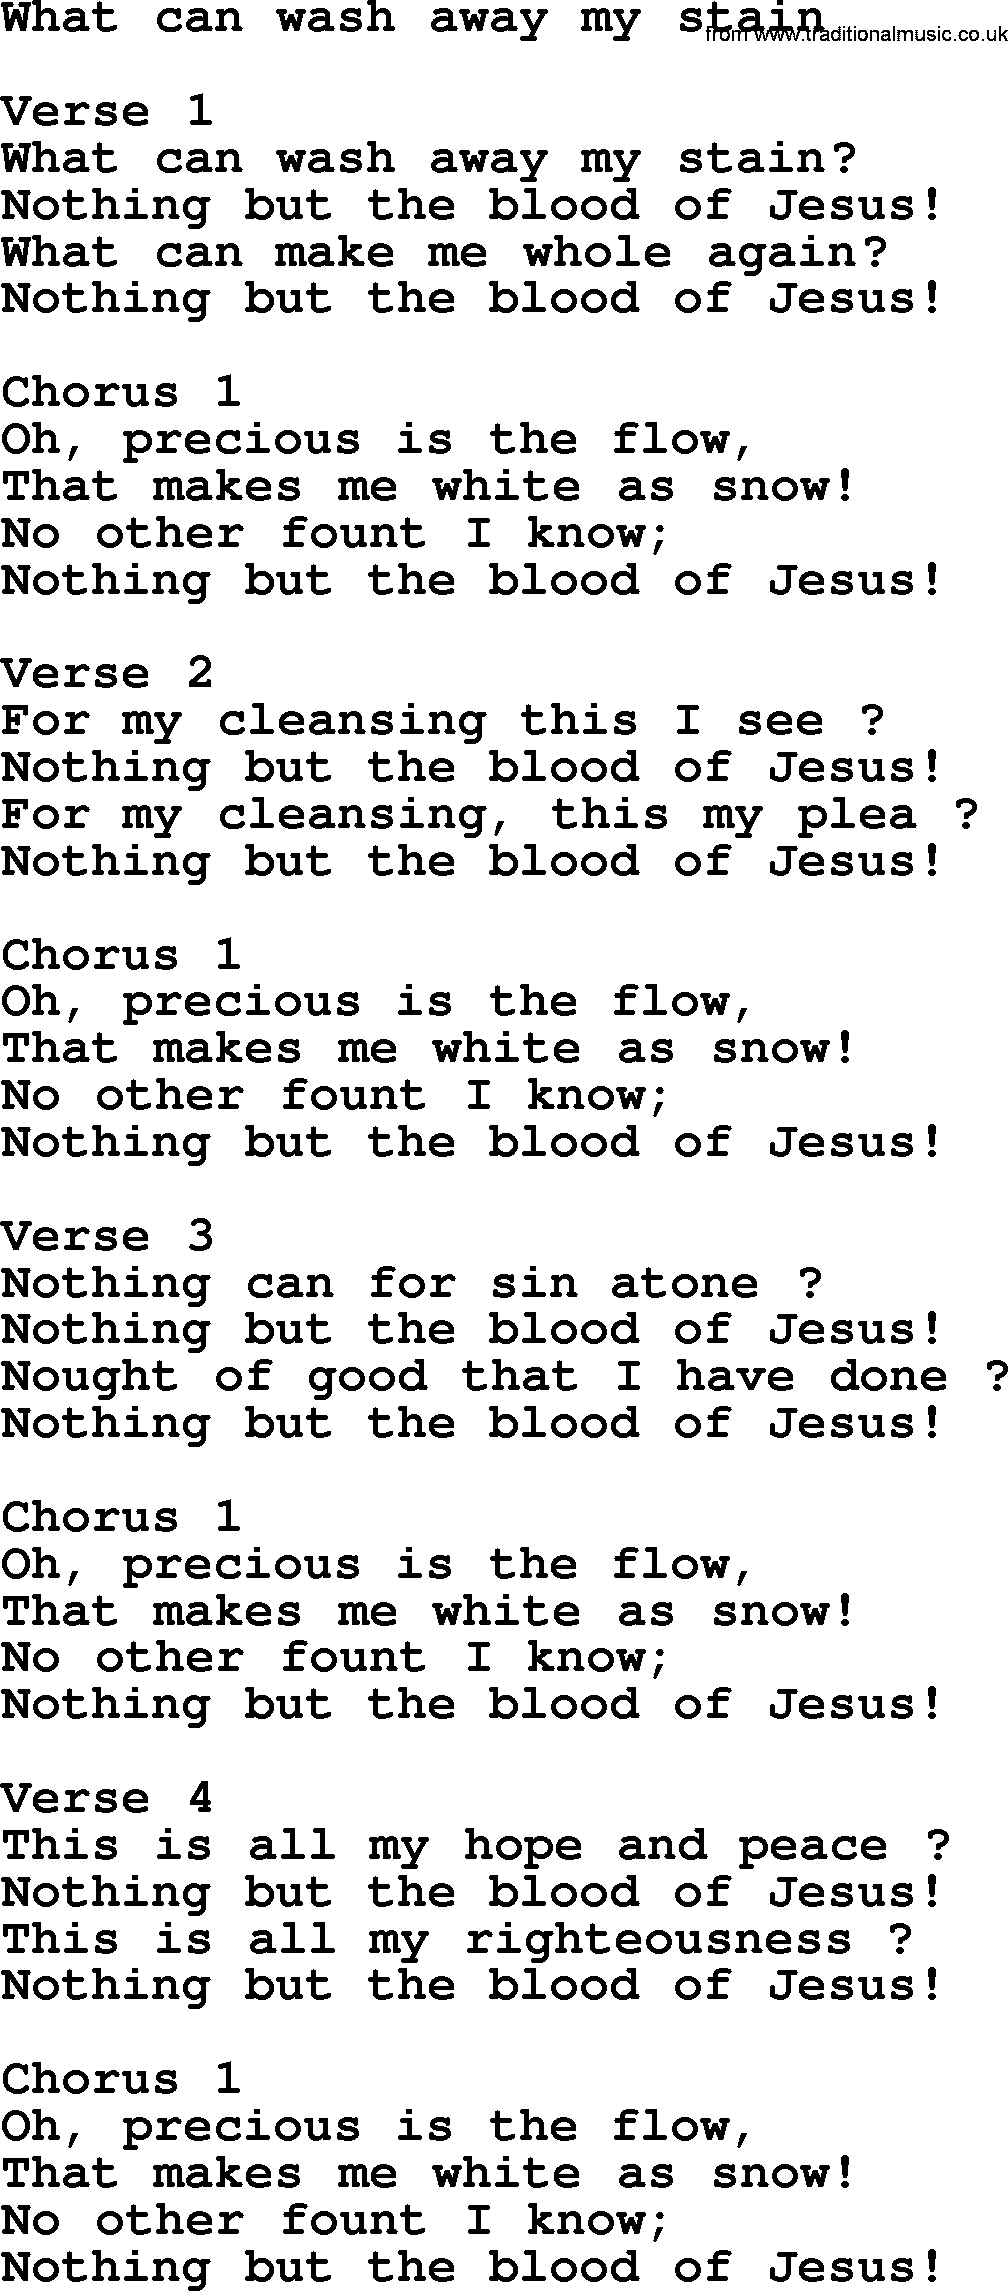 Apostolic and Pentecostal Hymns and Gospel Songs, Hymn: What Can Wash Away My Stain, Christian lyrics and PDF